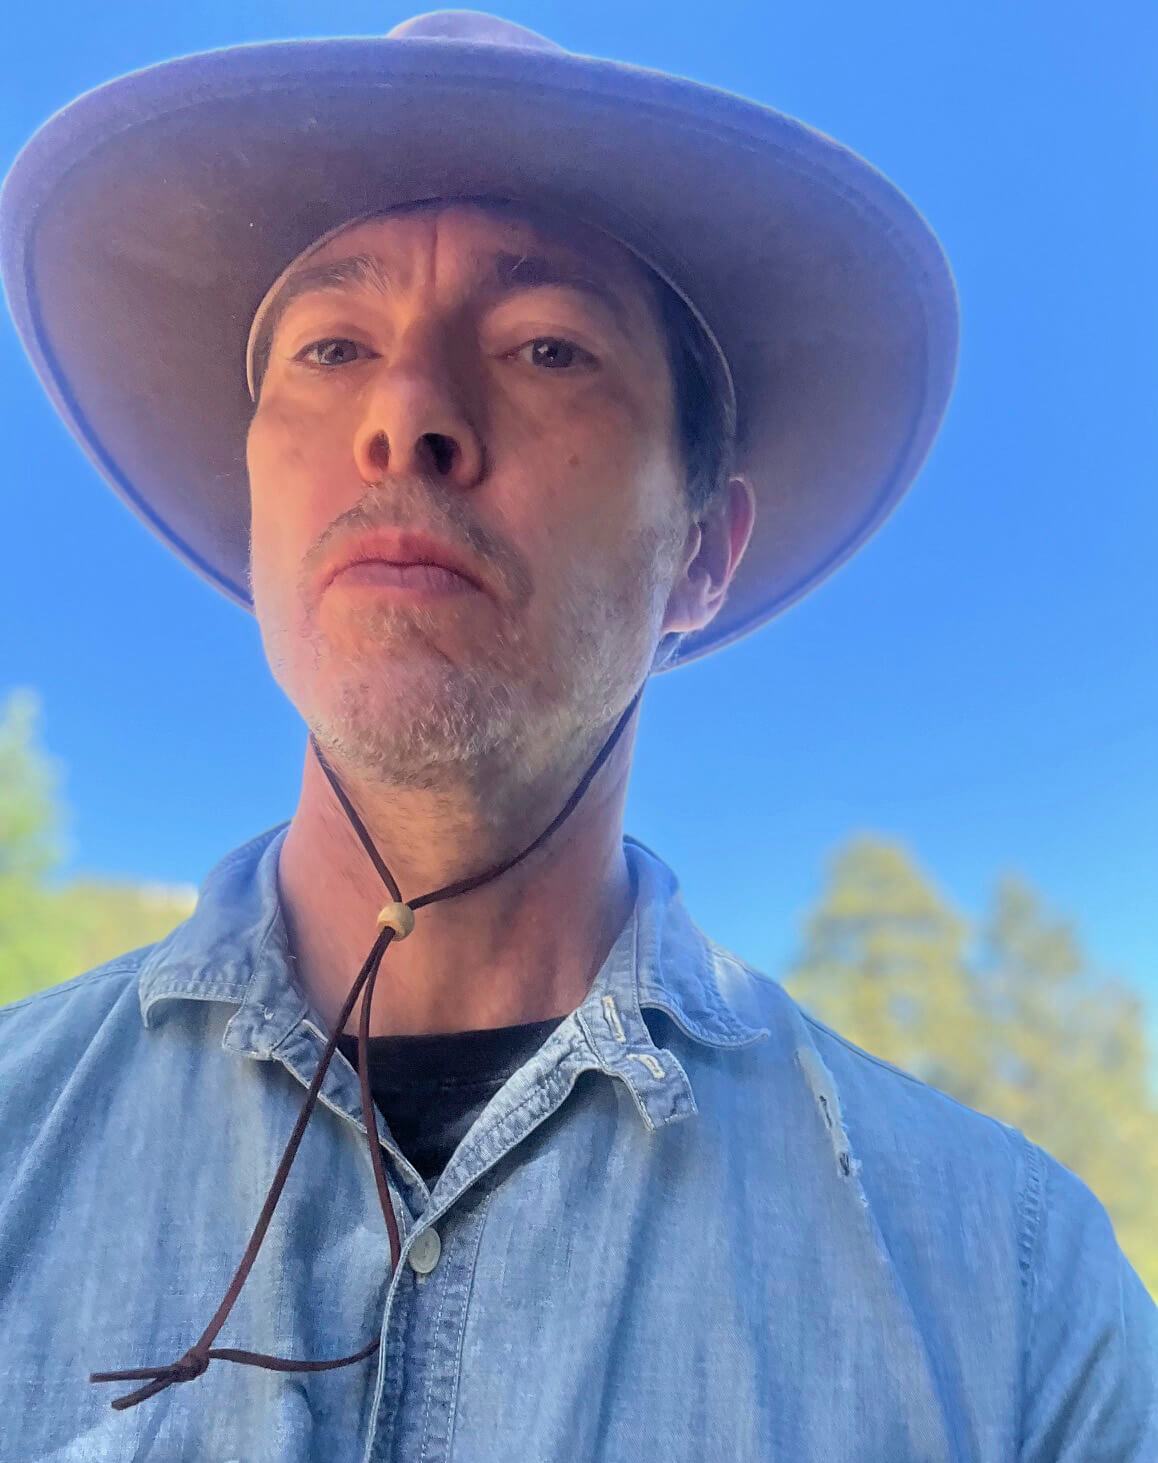 Bill Callahan Reveals Video for "Last One At The Party"